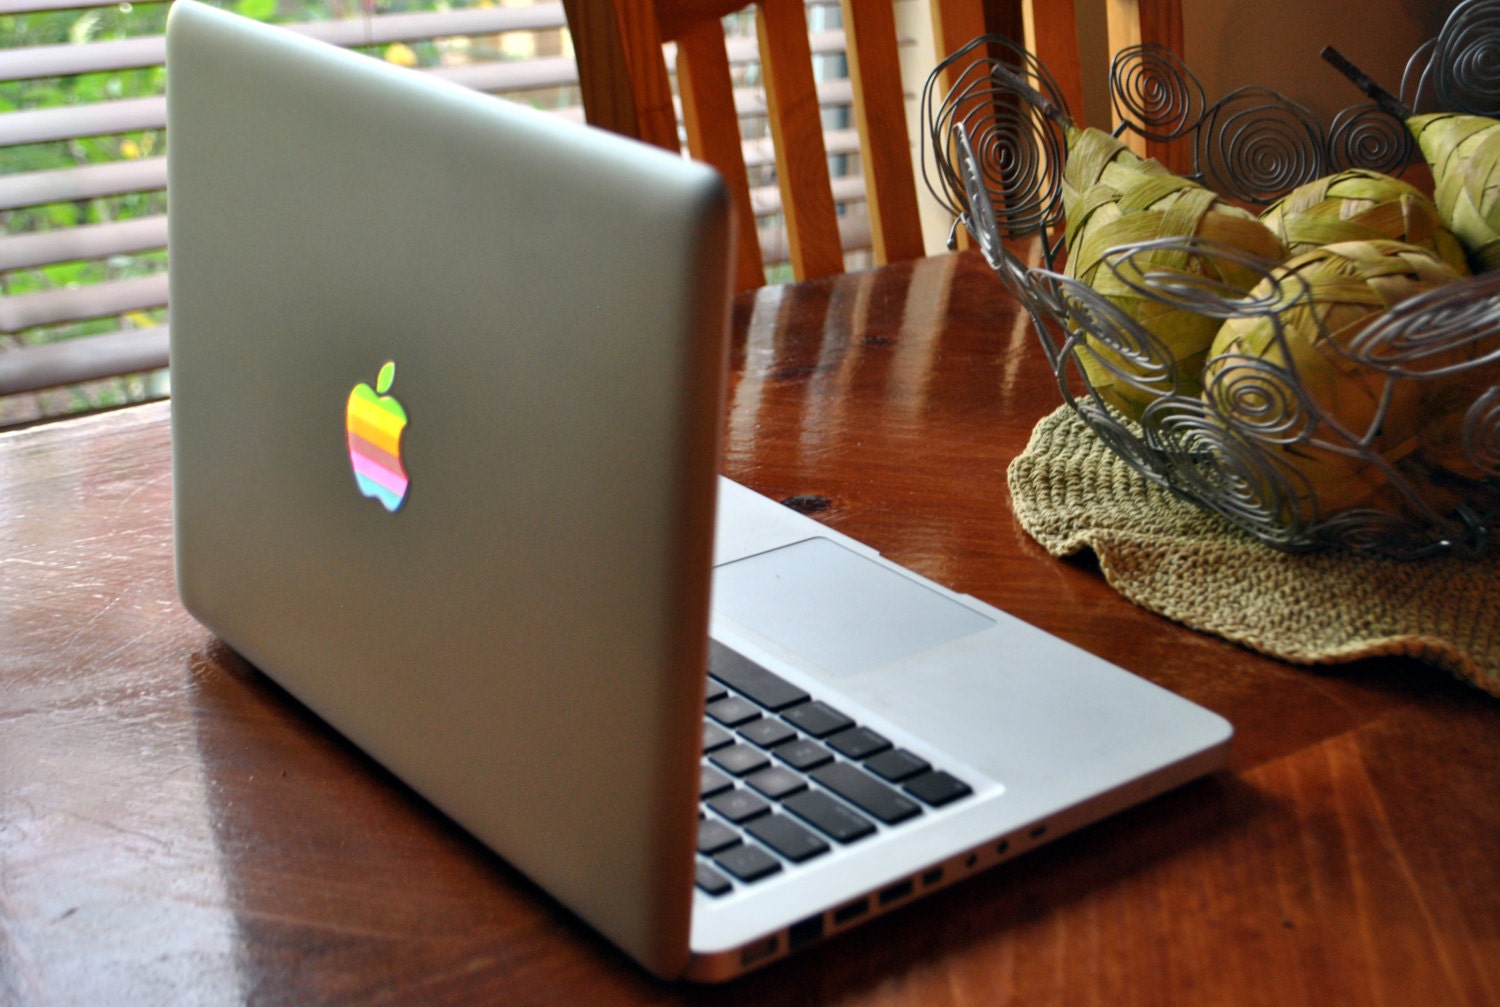 Utilfreds Hemmelighed Pick up blade GLOWING Apple Macbook Decal Sticker Retro LED Logo From - Etsy